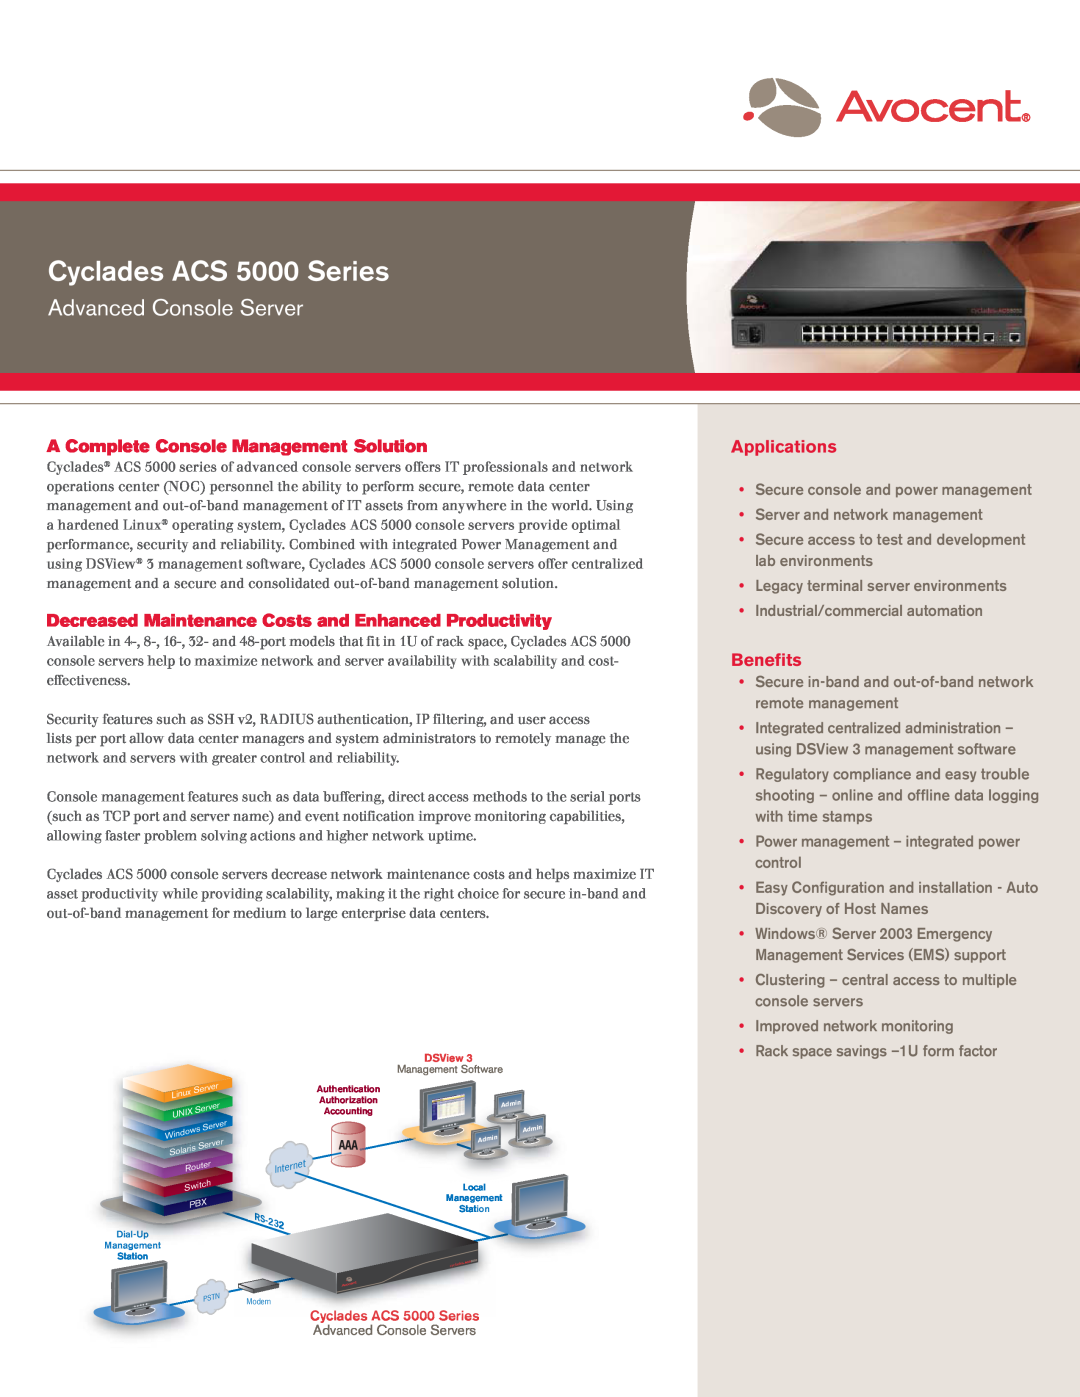 Avocent ACS 5000 SERIES manual A Complete Console Management Solution, Applications, Beneﬁts, Cyclades ACS 5000 Series 